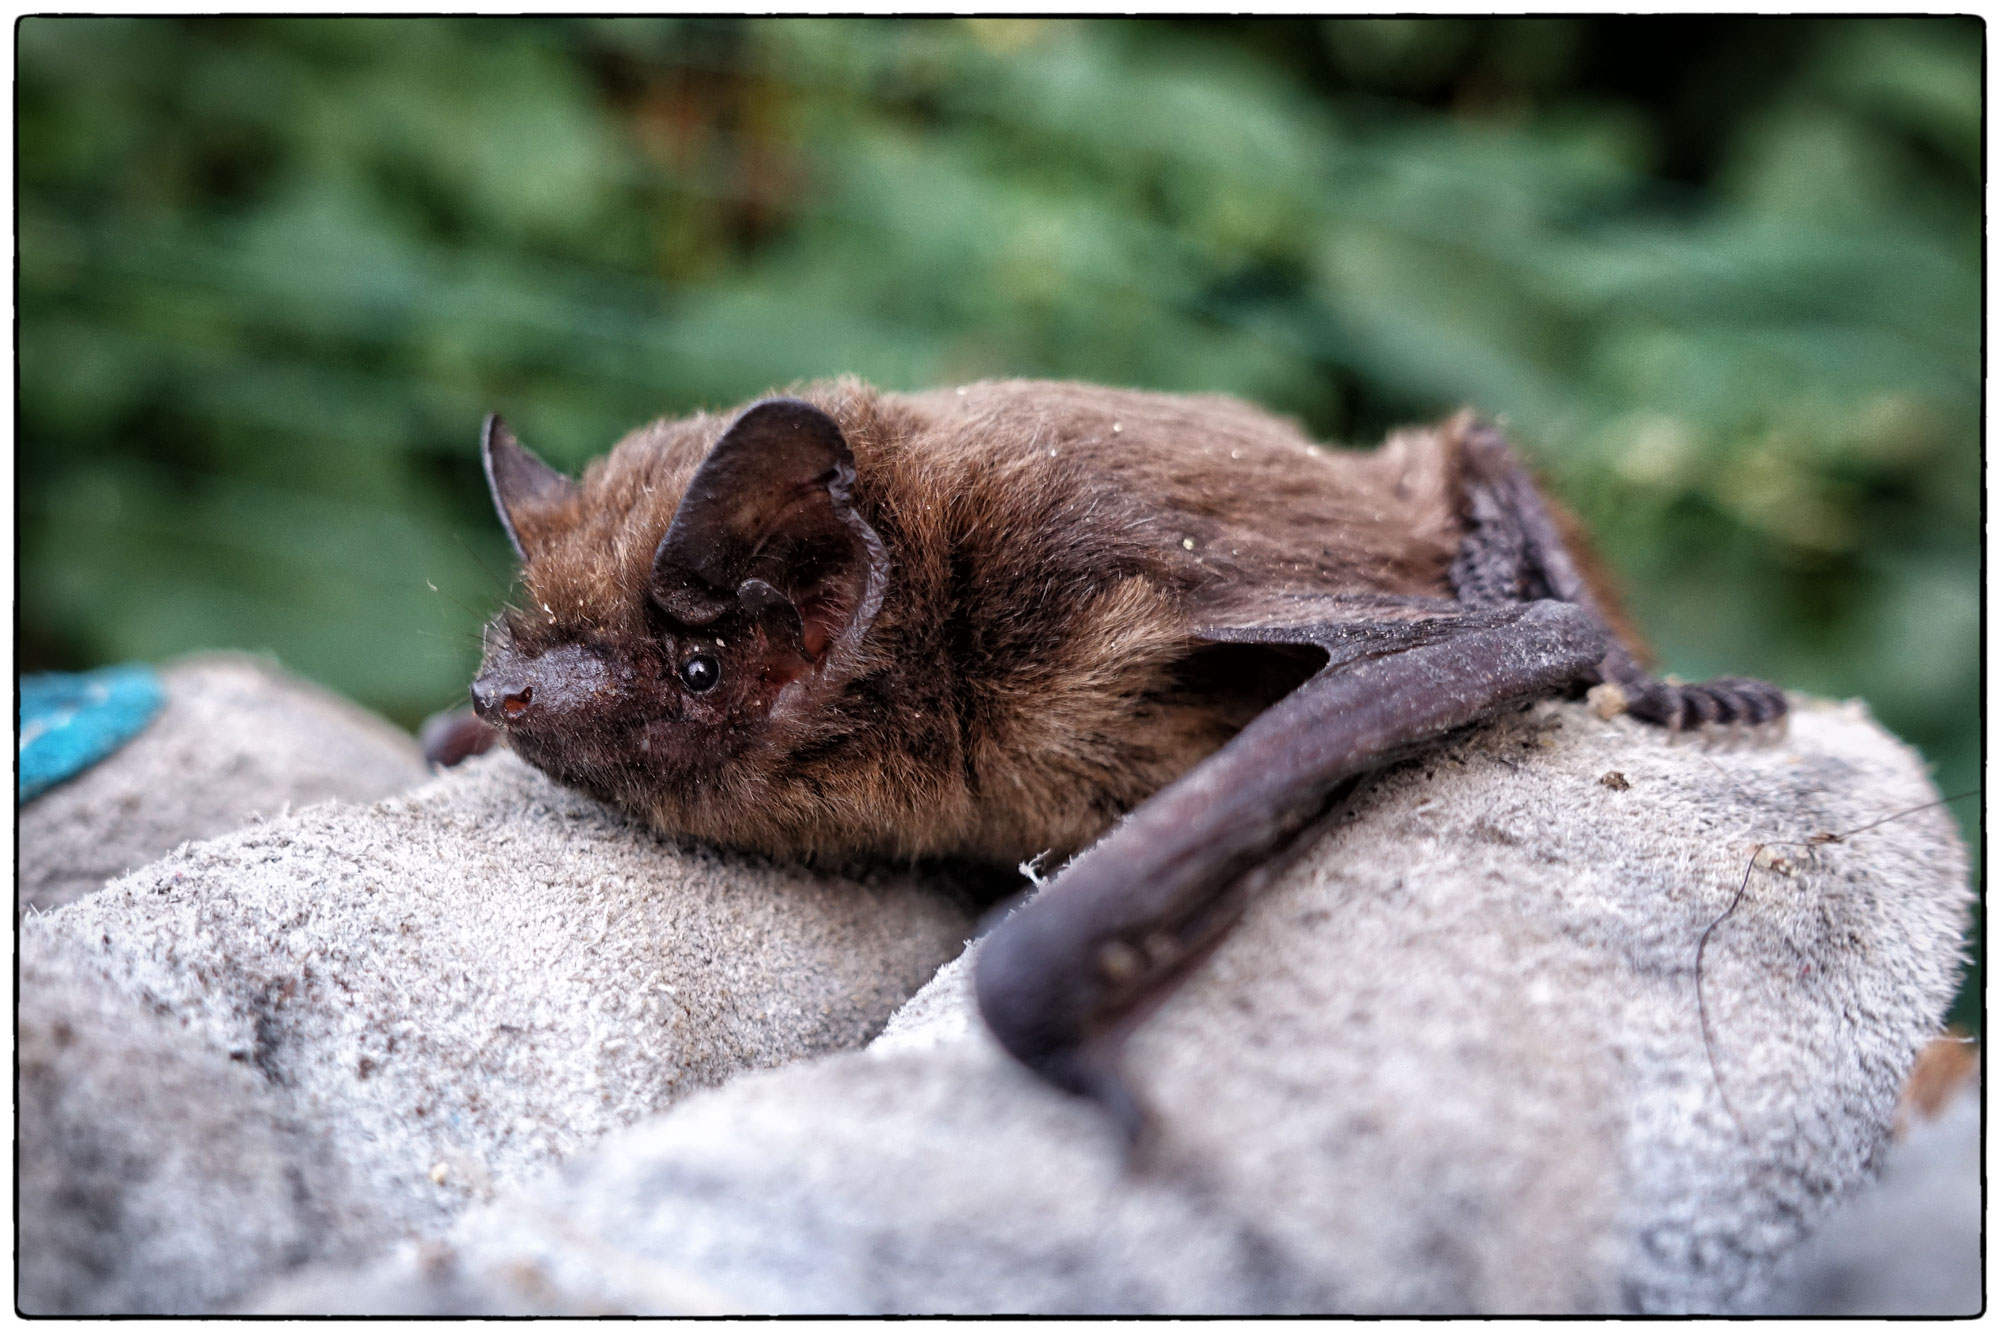 A bat perched on an ecologists' protective glove